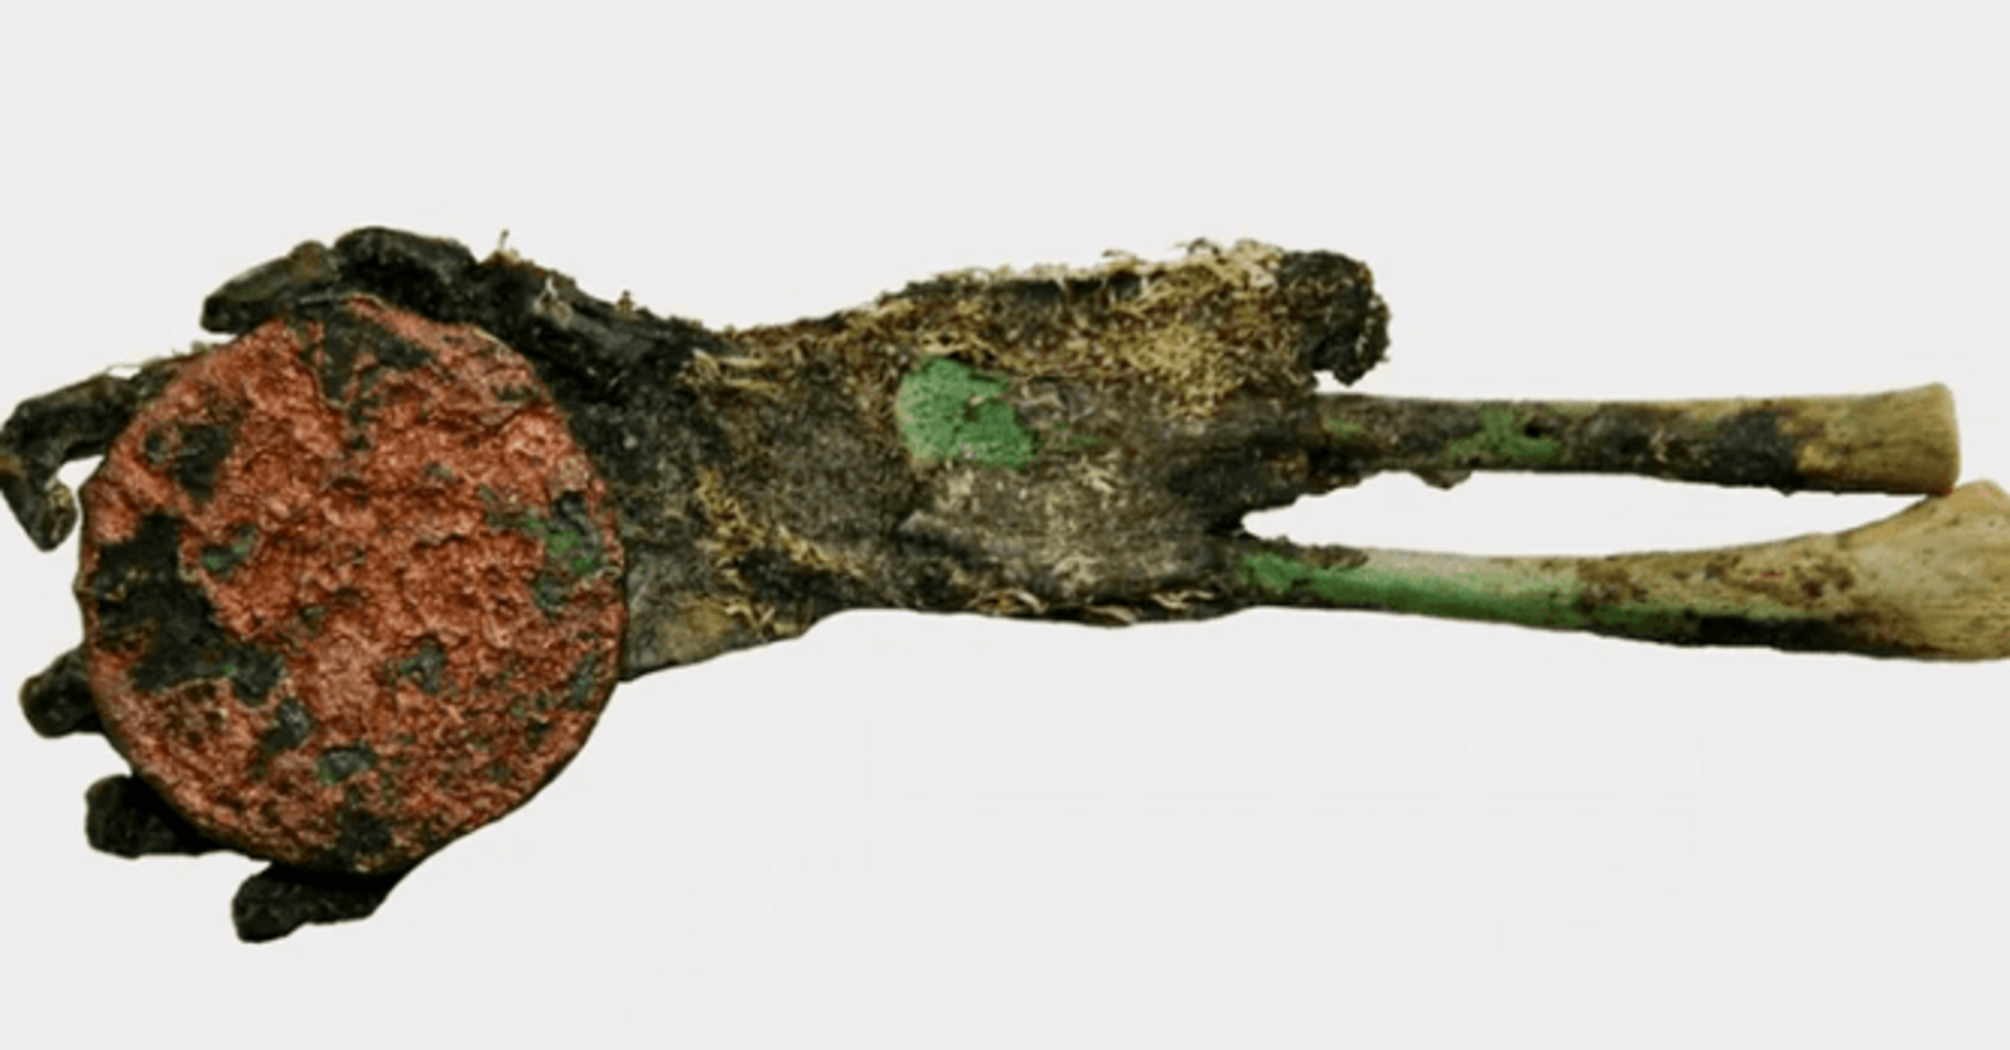 Eerie discovery: Hungarian scientists find a mummified child's hand clutching an ancient coin